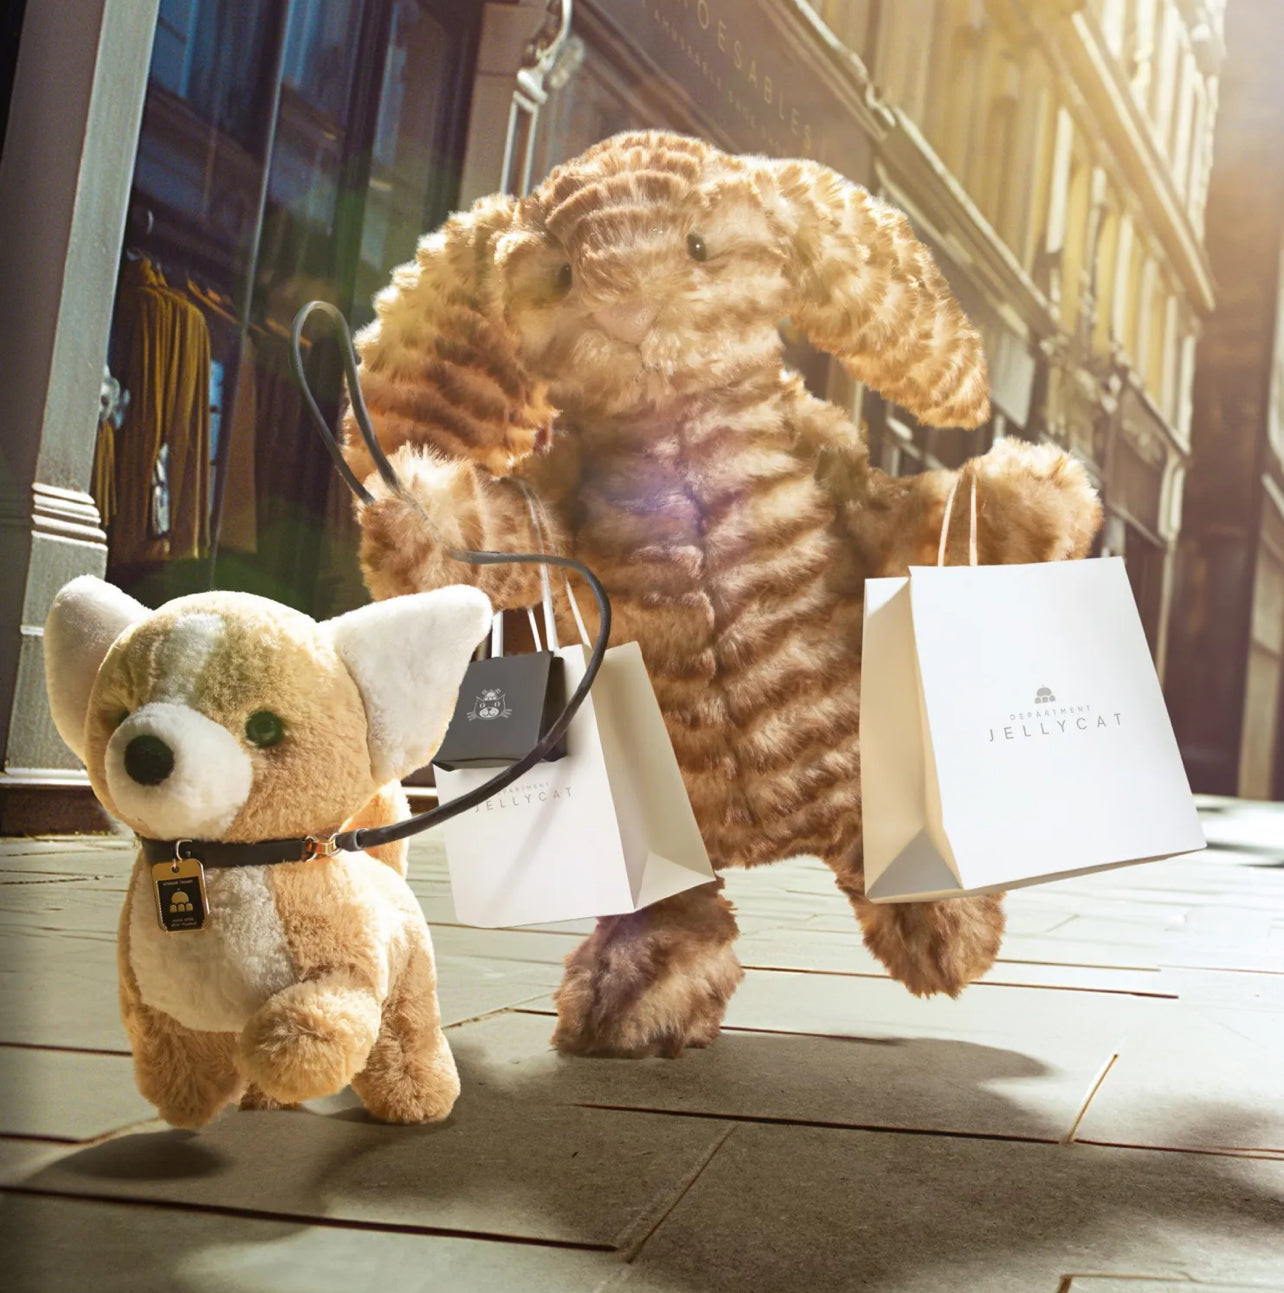 Jellycat bunny is walking a dog while carrying a Jellycat logo bag. 